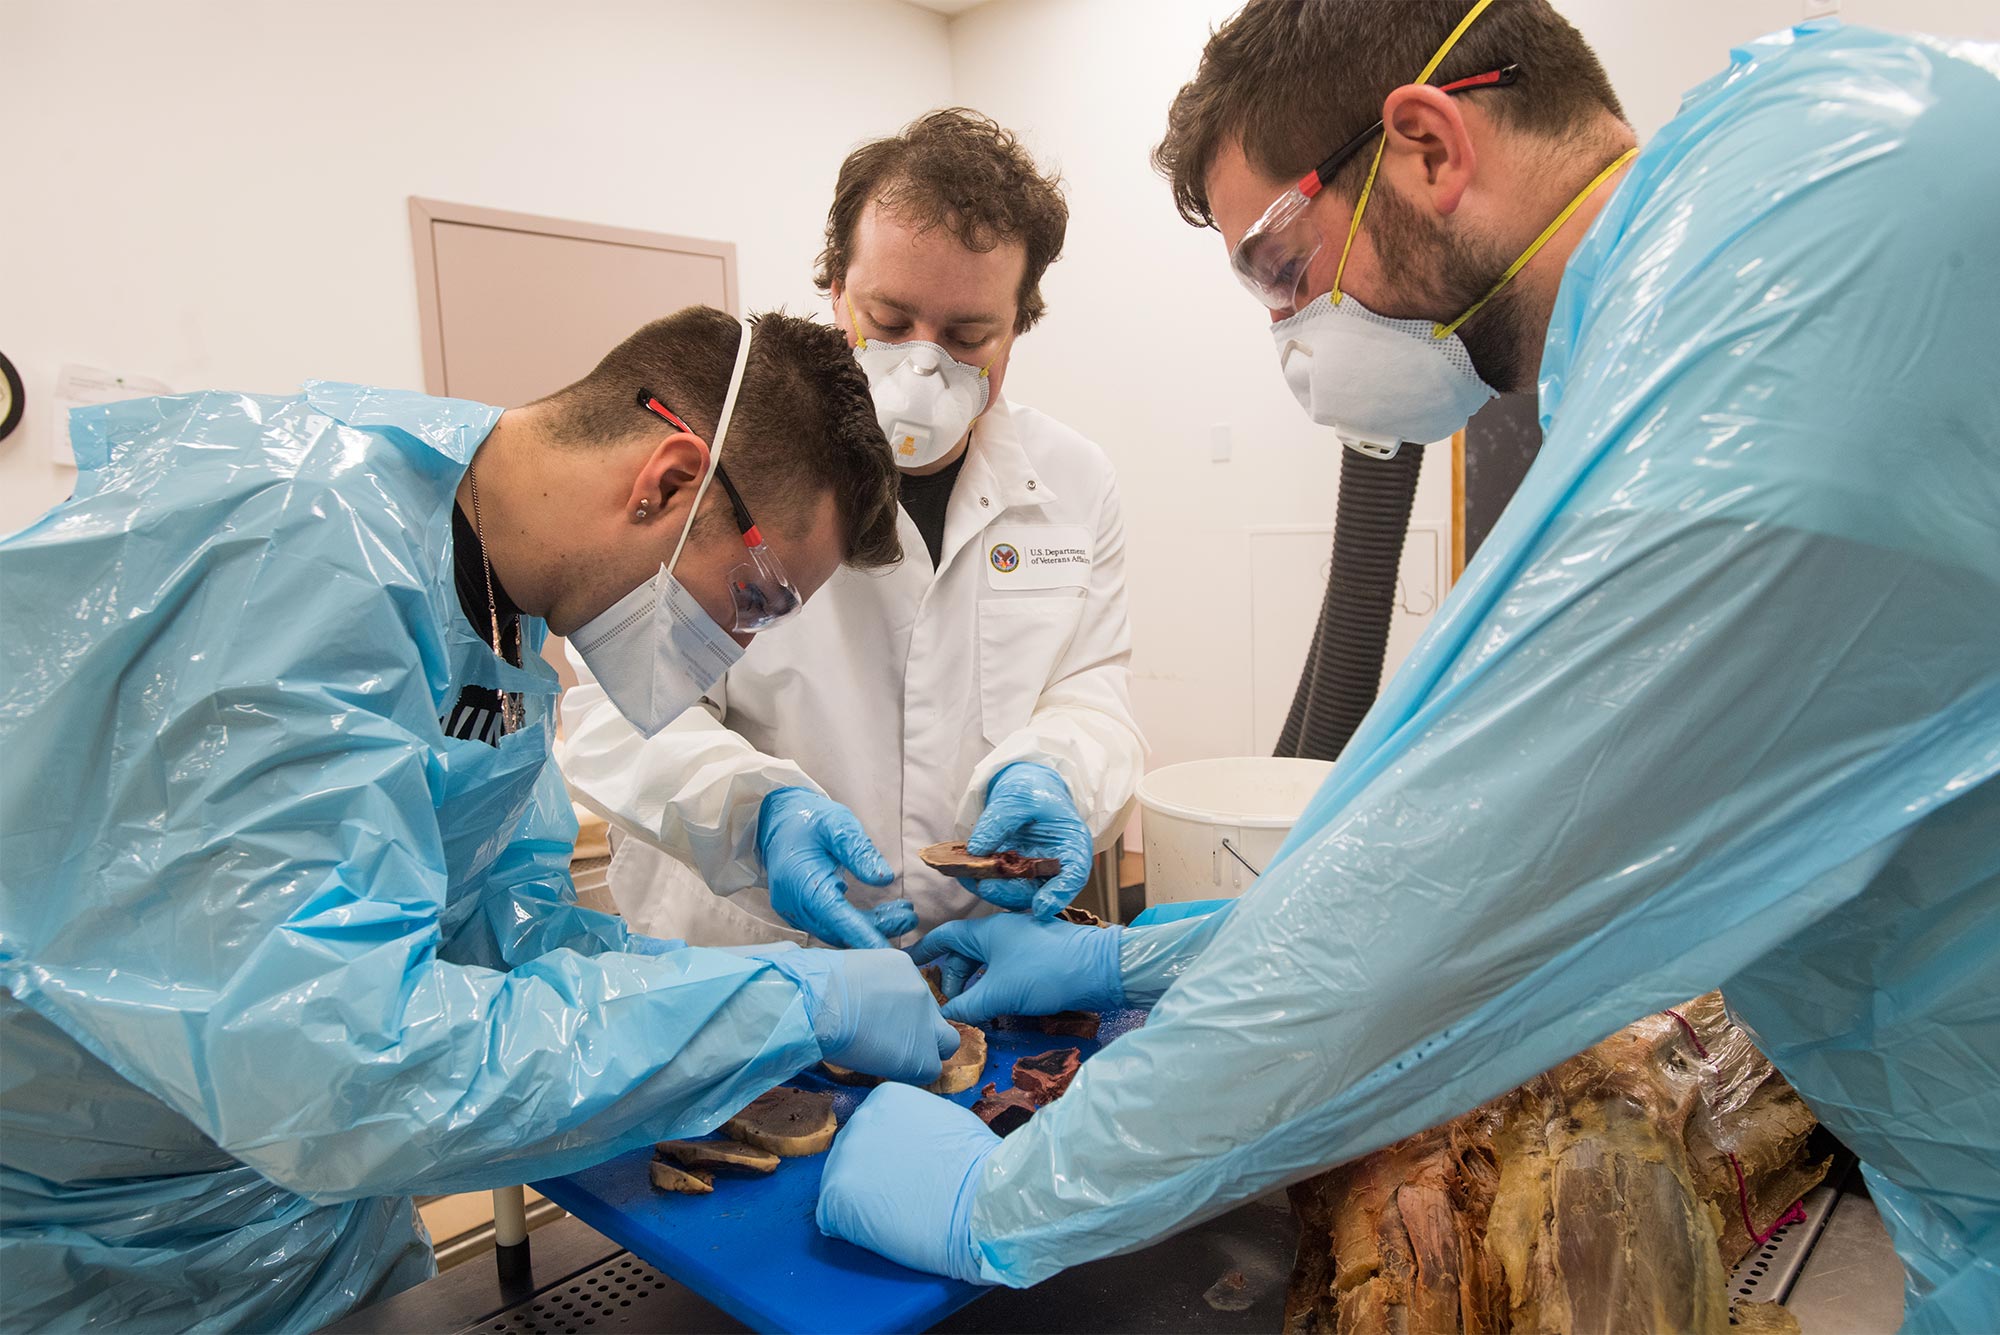 Dissection instructor Daniel Kirsch leads graduate students in the dissection of a human heart in the Boston University Cadaver Lab advanced anatomy class.